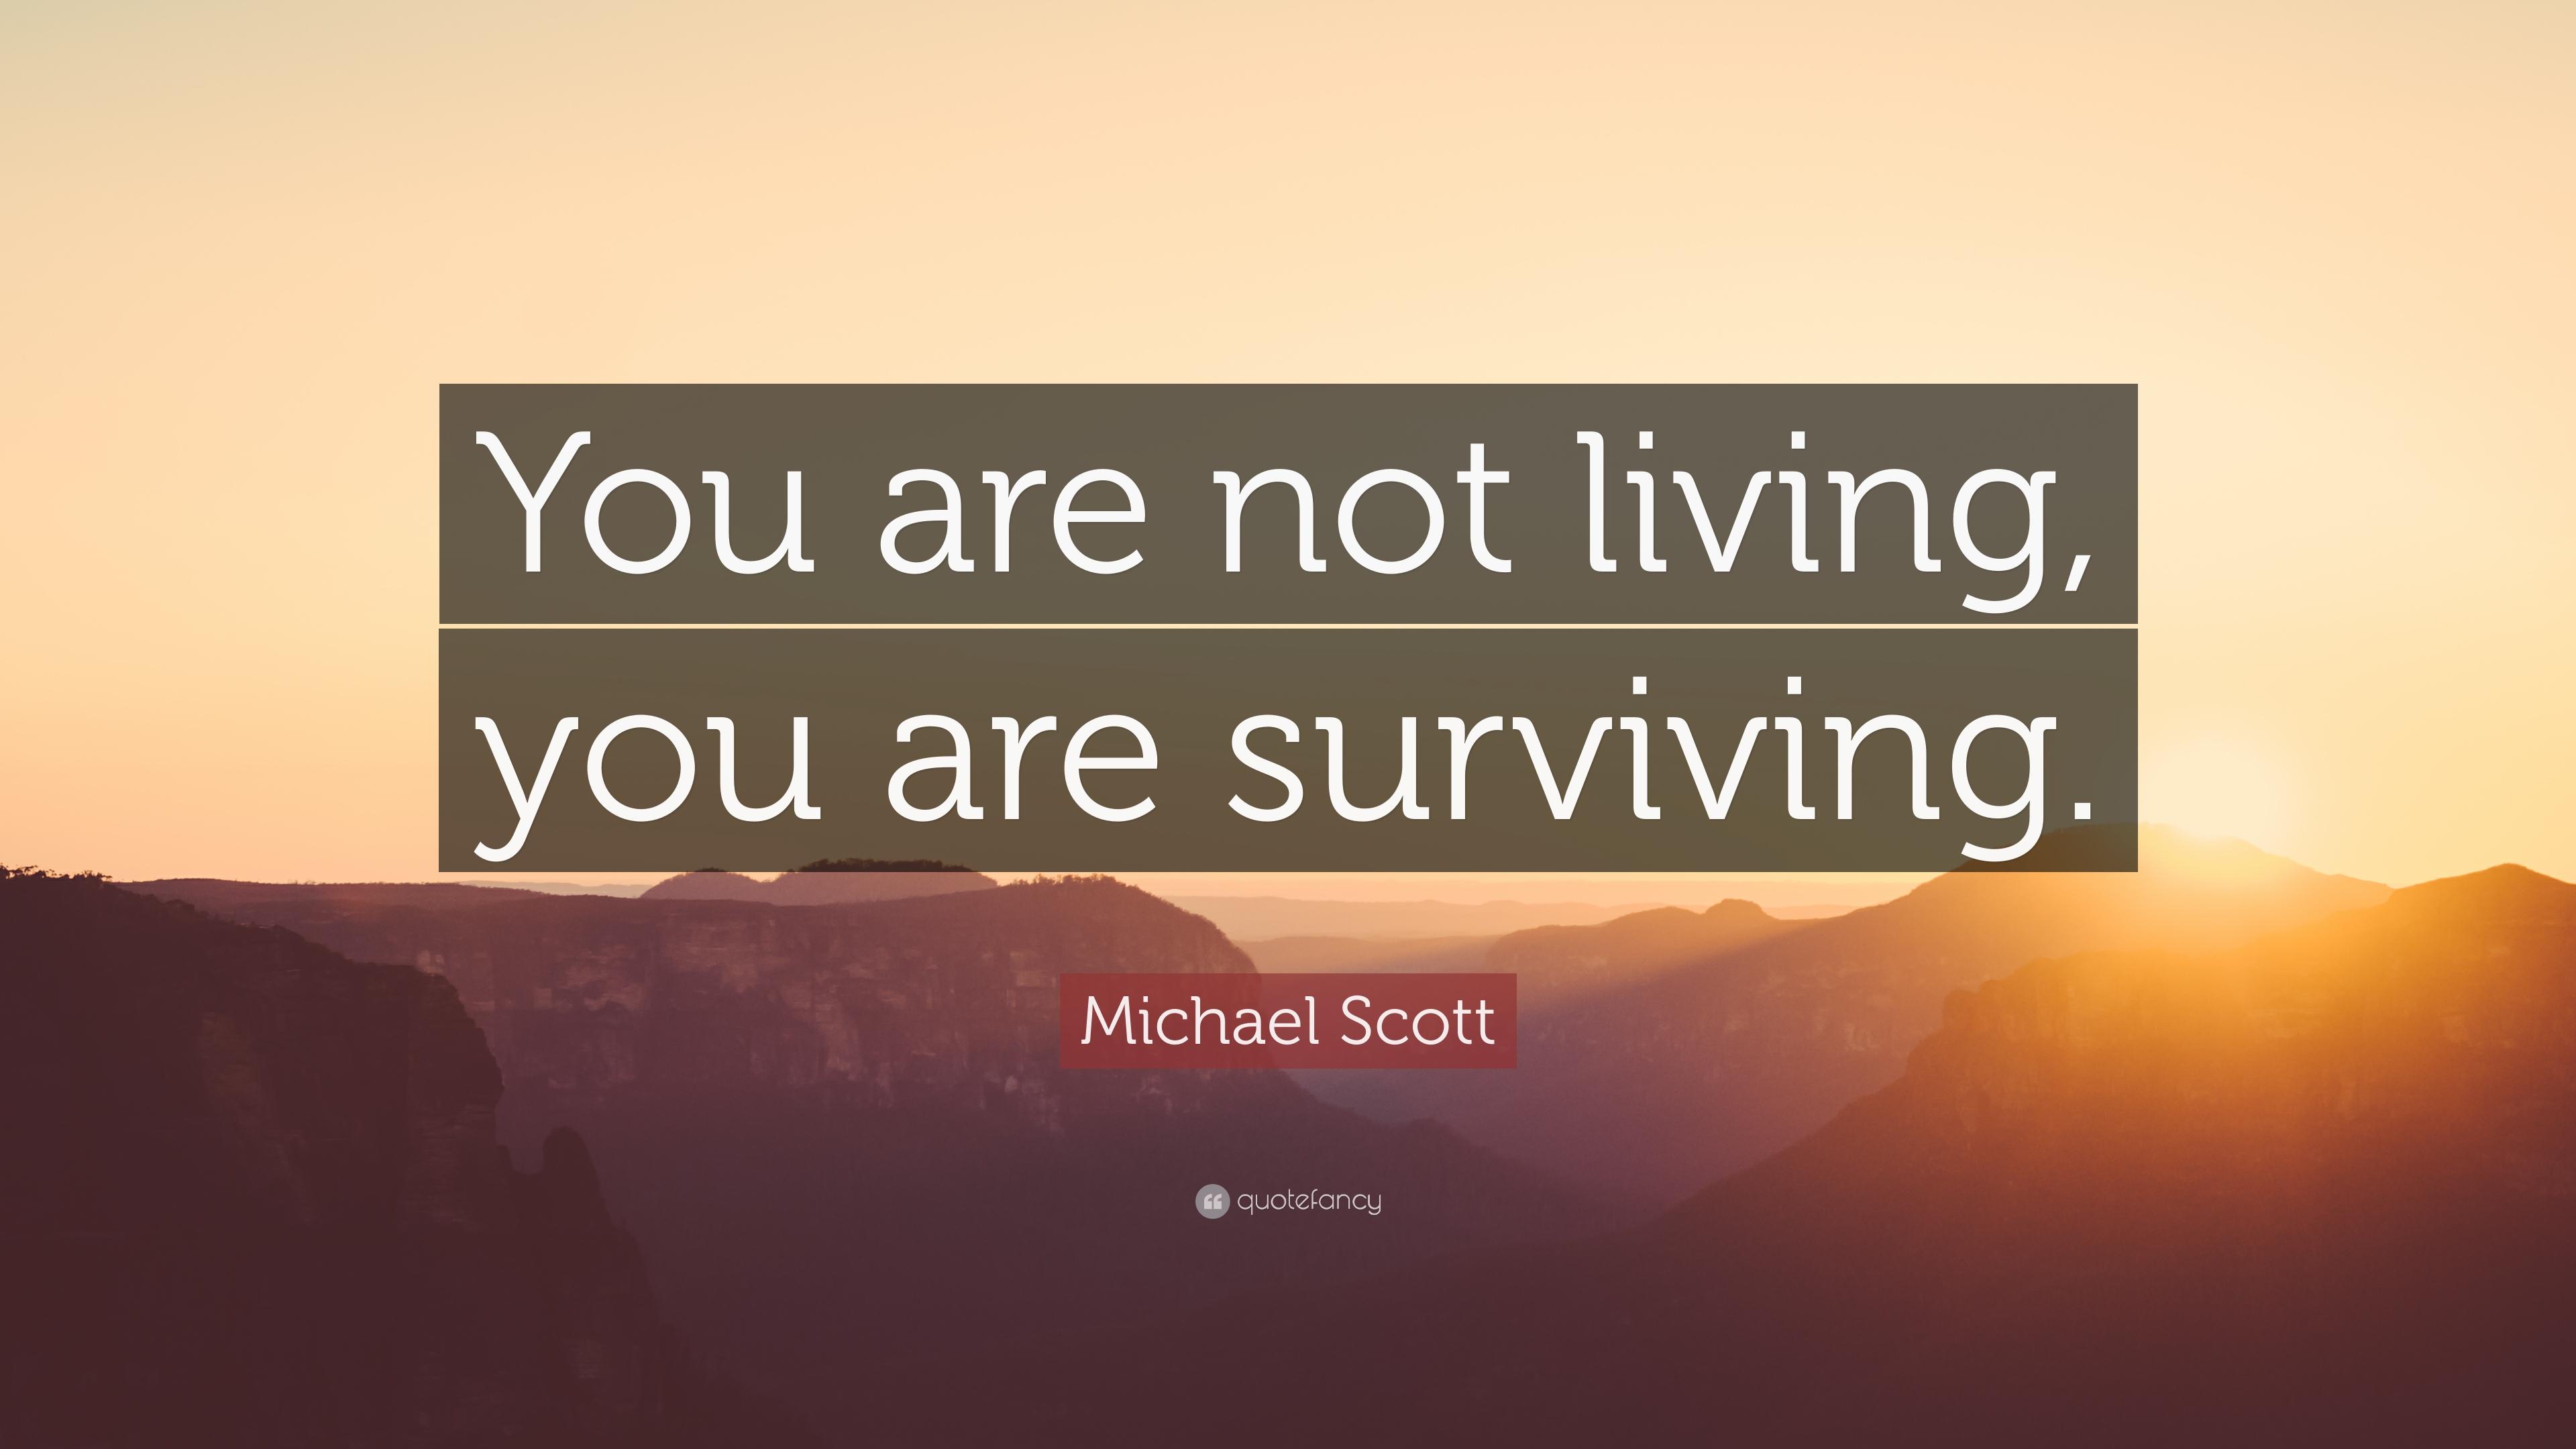 Michael Scott Quote: “You are not living, you are surviving.” 12